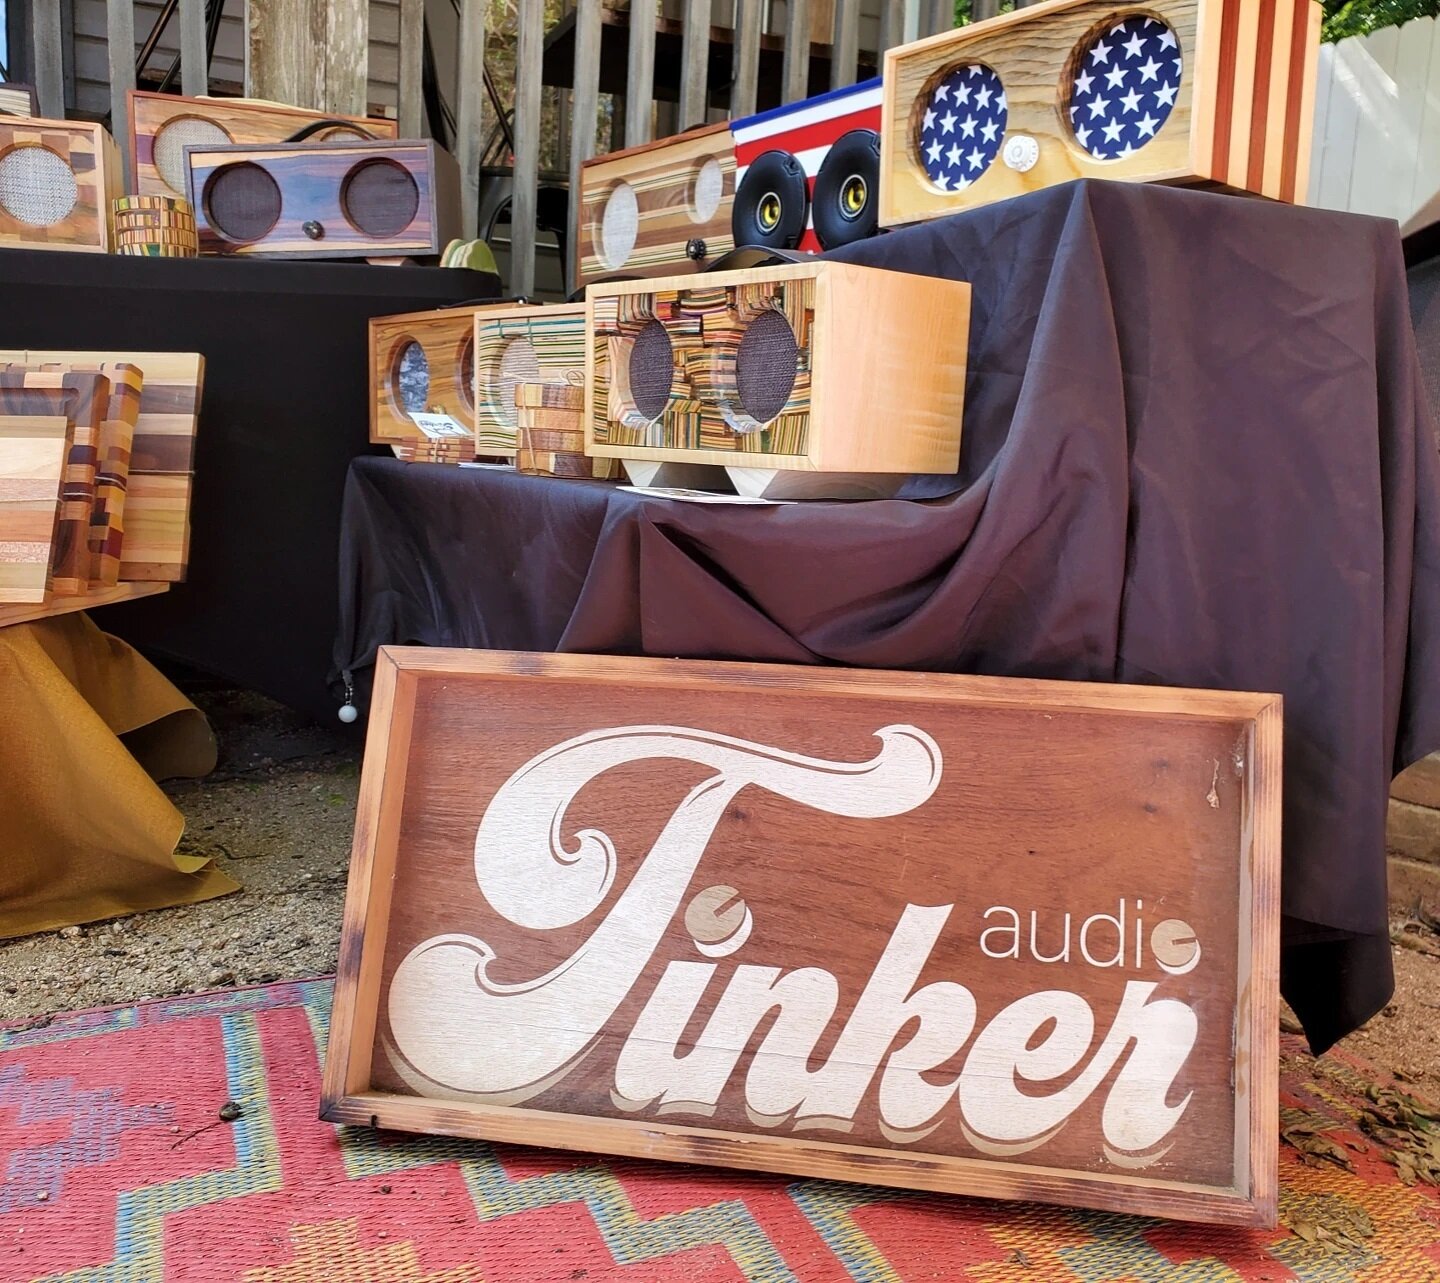 All set up for another market with @austinmakerscollective at @tomsaustin. If your in the south congress area, come check it out. Lots of cool and unique vendors here for all your needs. #tinkeraudio #custom #bluetooth #speaker #handmade #wood #uniqu